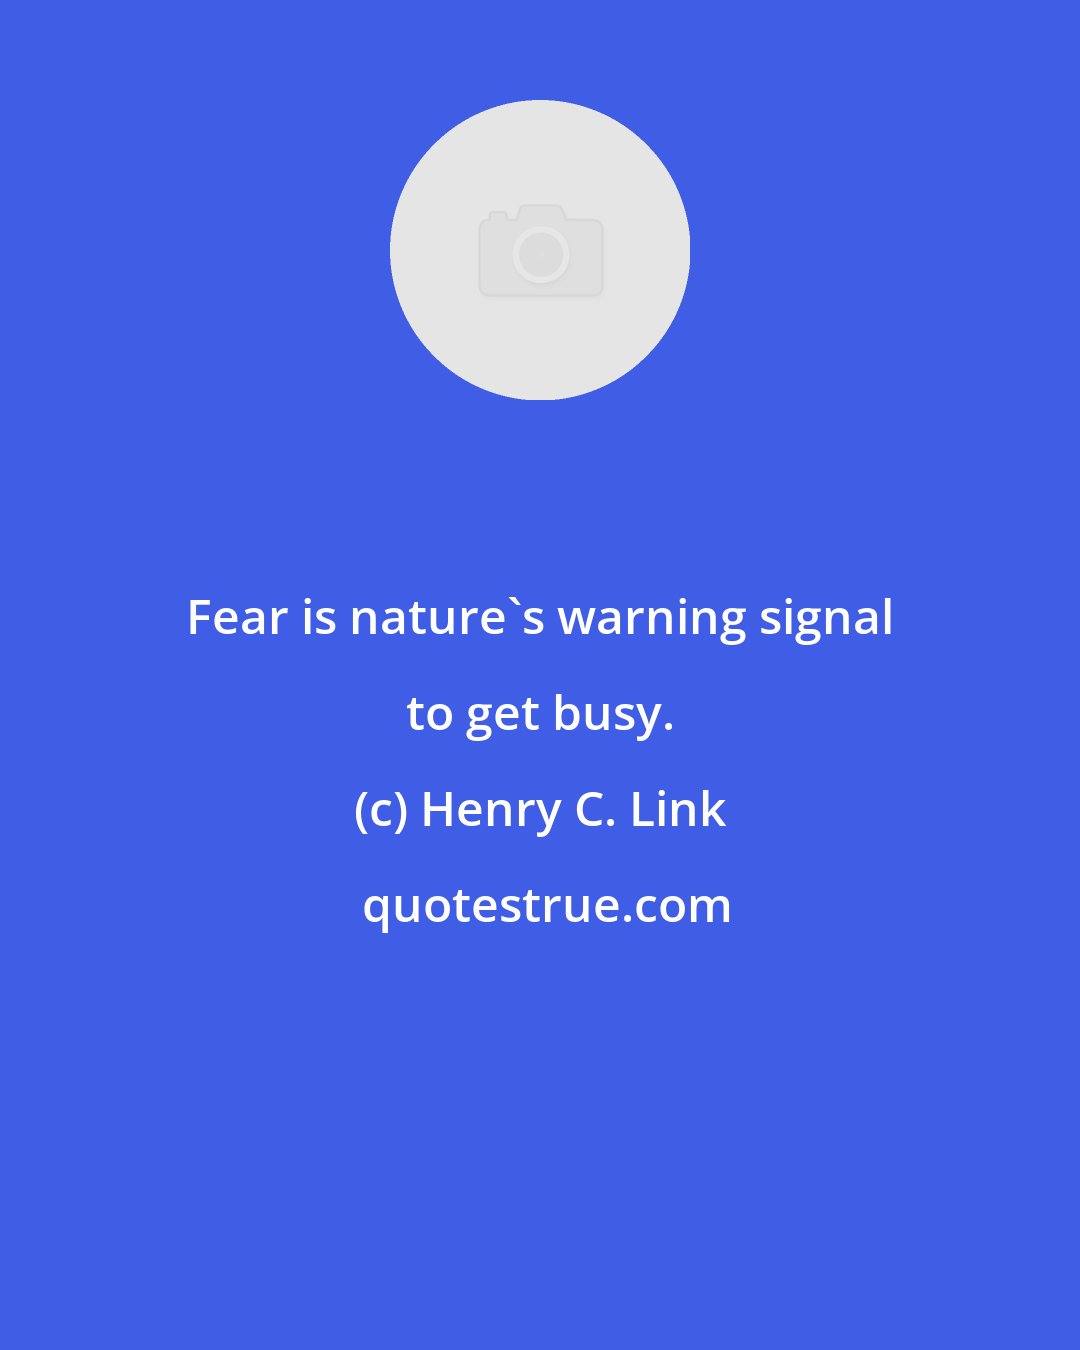 Henry C. Link: Fear is nature's warning signal to get busy.